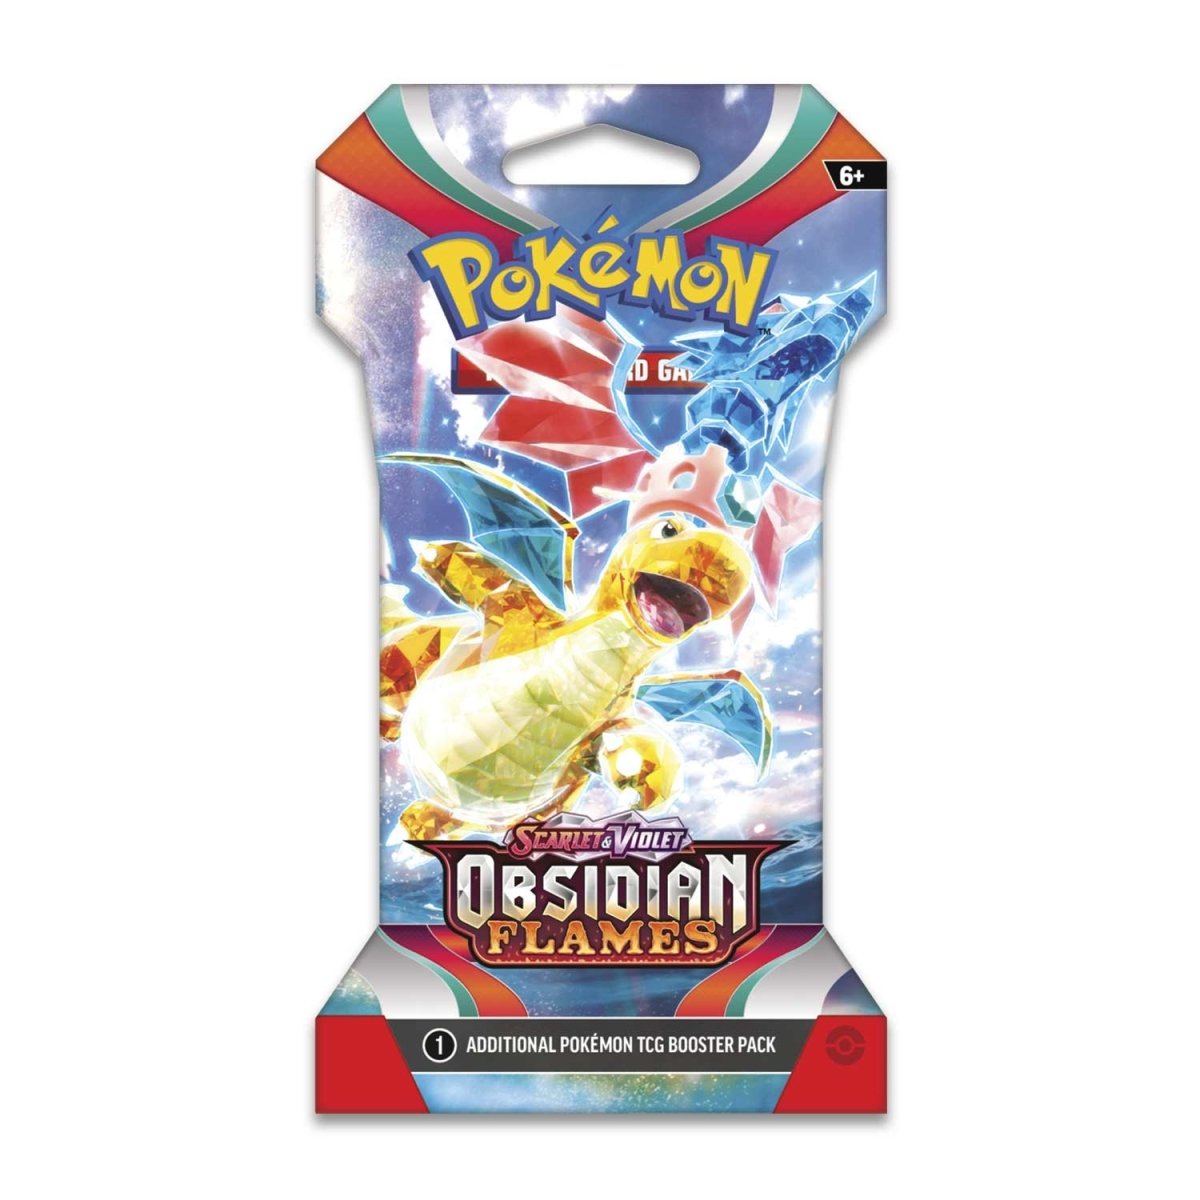 
                  
                    Image of the Pokémon TCG: Scarlet & Violet—Obsidian Flames Sleeved Booster Pack. The pack is enveloped by vibrant imagery of Charizard ex and other captivating Pokémon. This booster pack includes 10 cards and 1 Basic Energy, ready to expand your deck.
                  
                